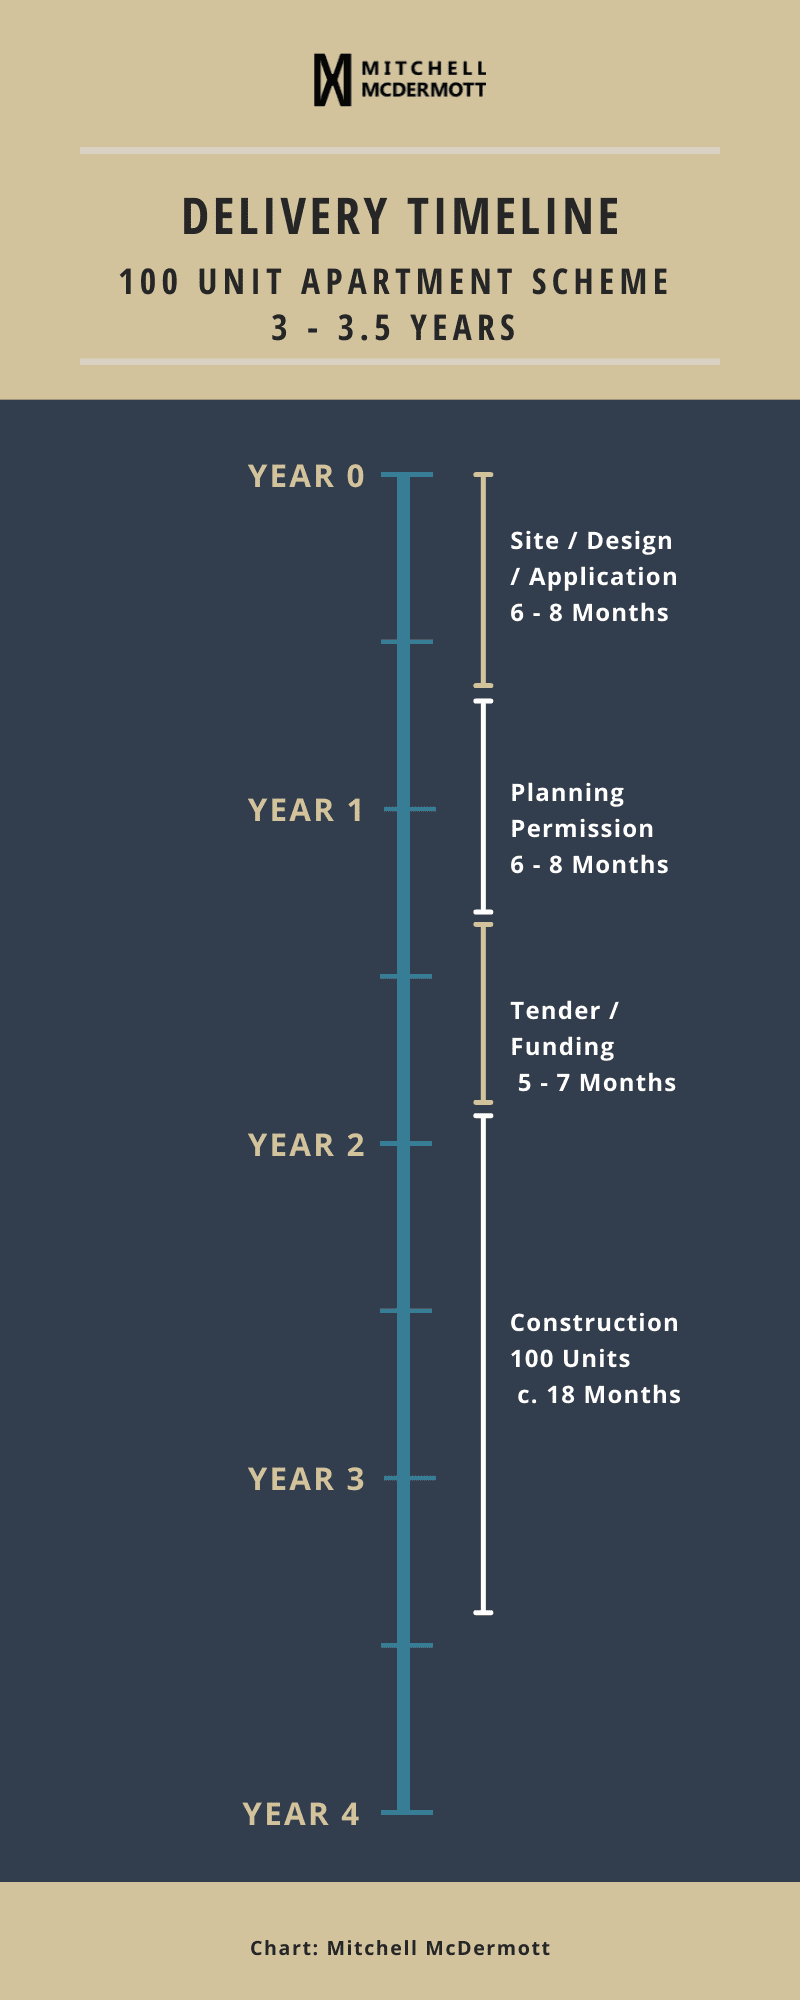 Delivery timeline of a 100 unit apartment scheme is 3 to 3.5 years